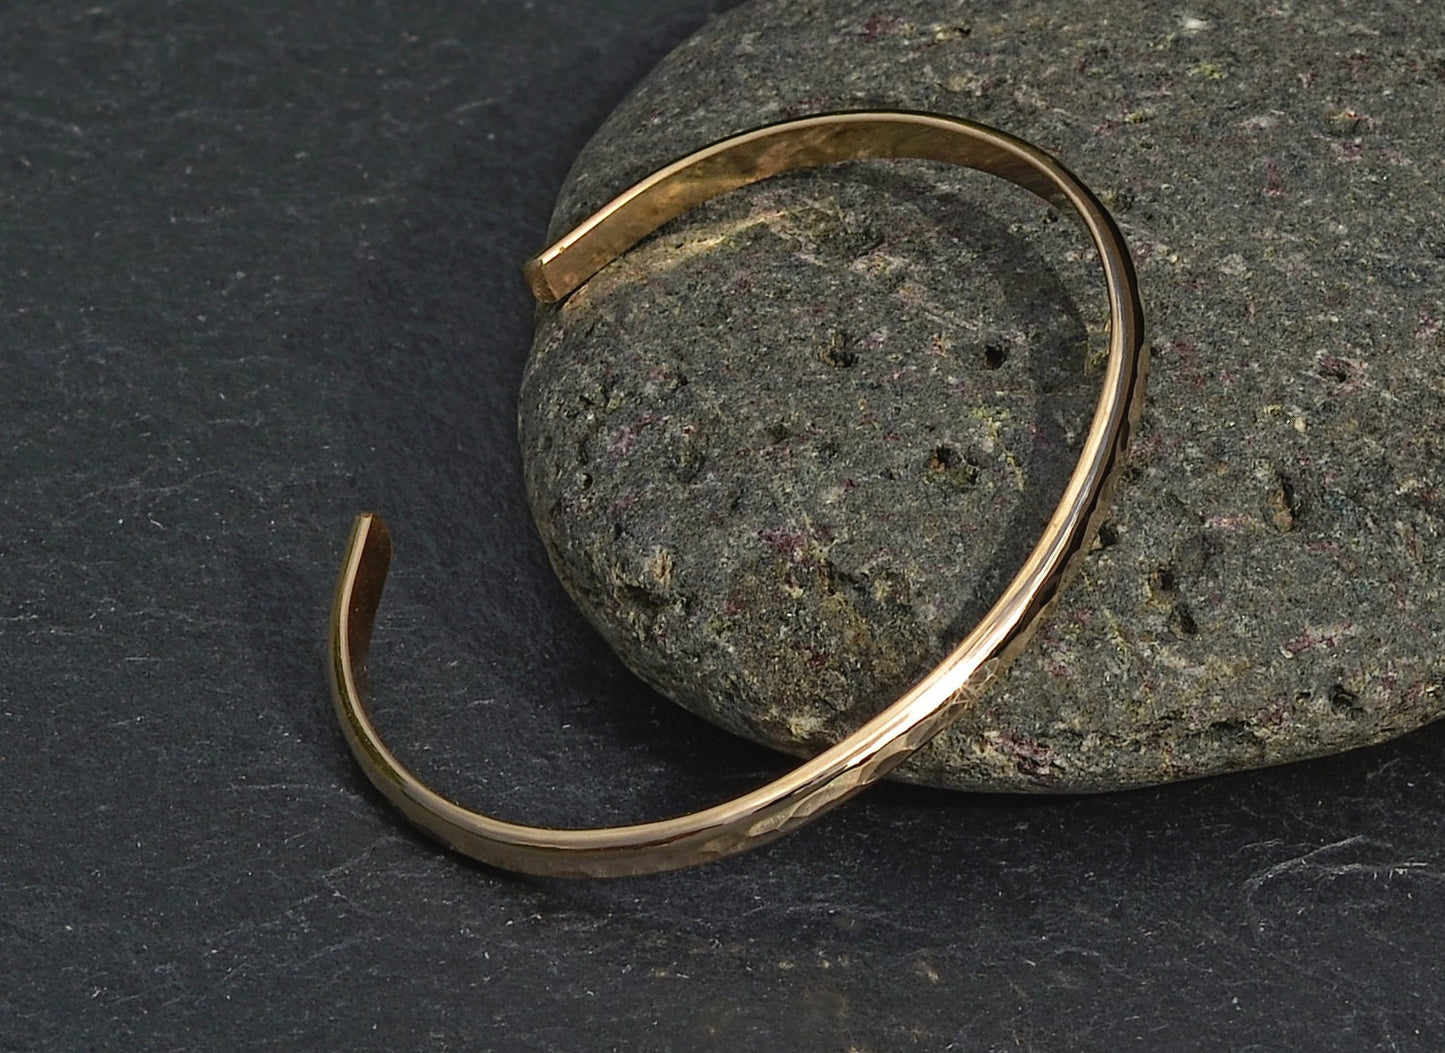 Gold filled hammered cuff bracelet with mirror finish - 14k on base metal